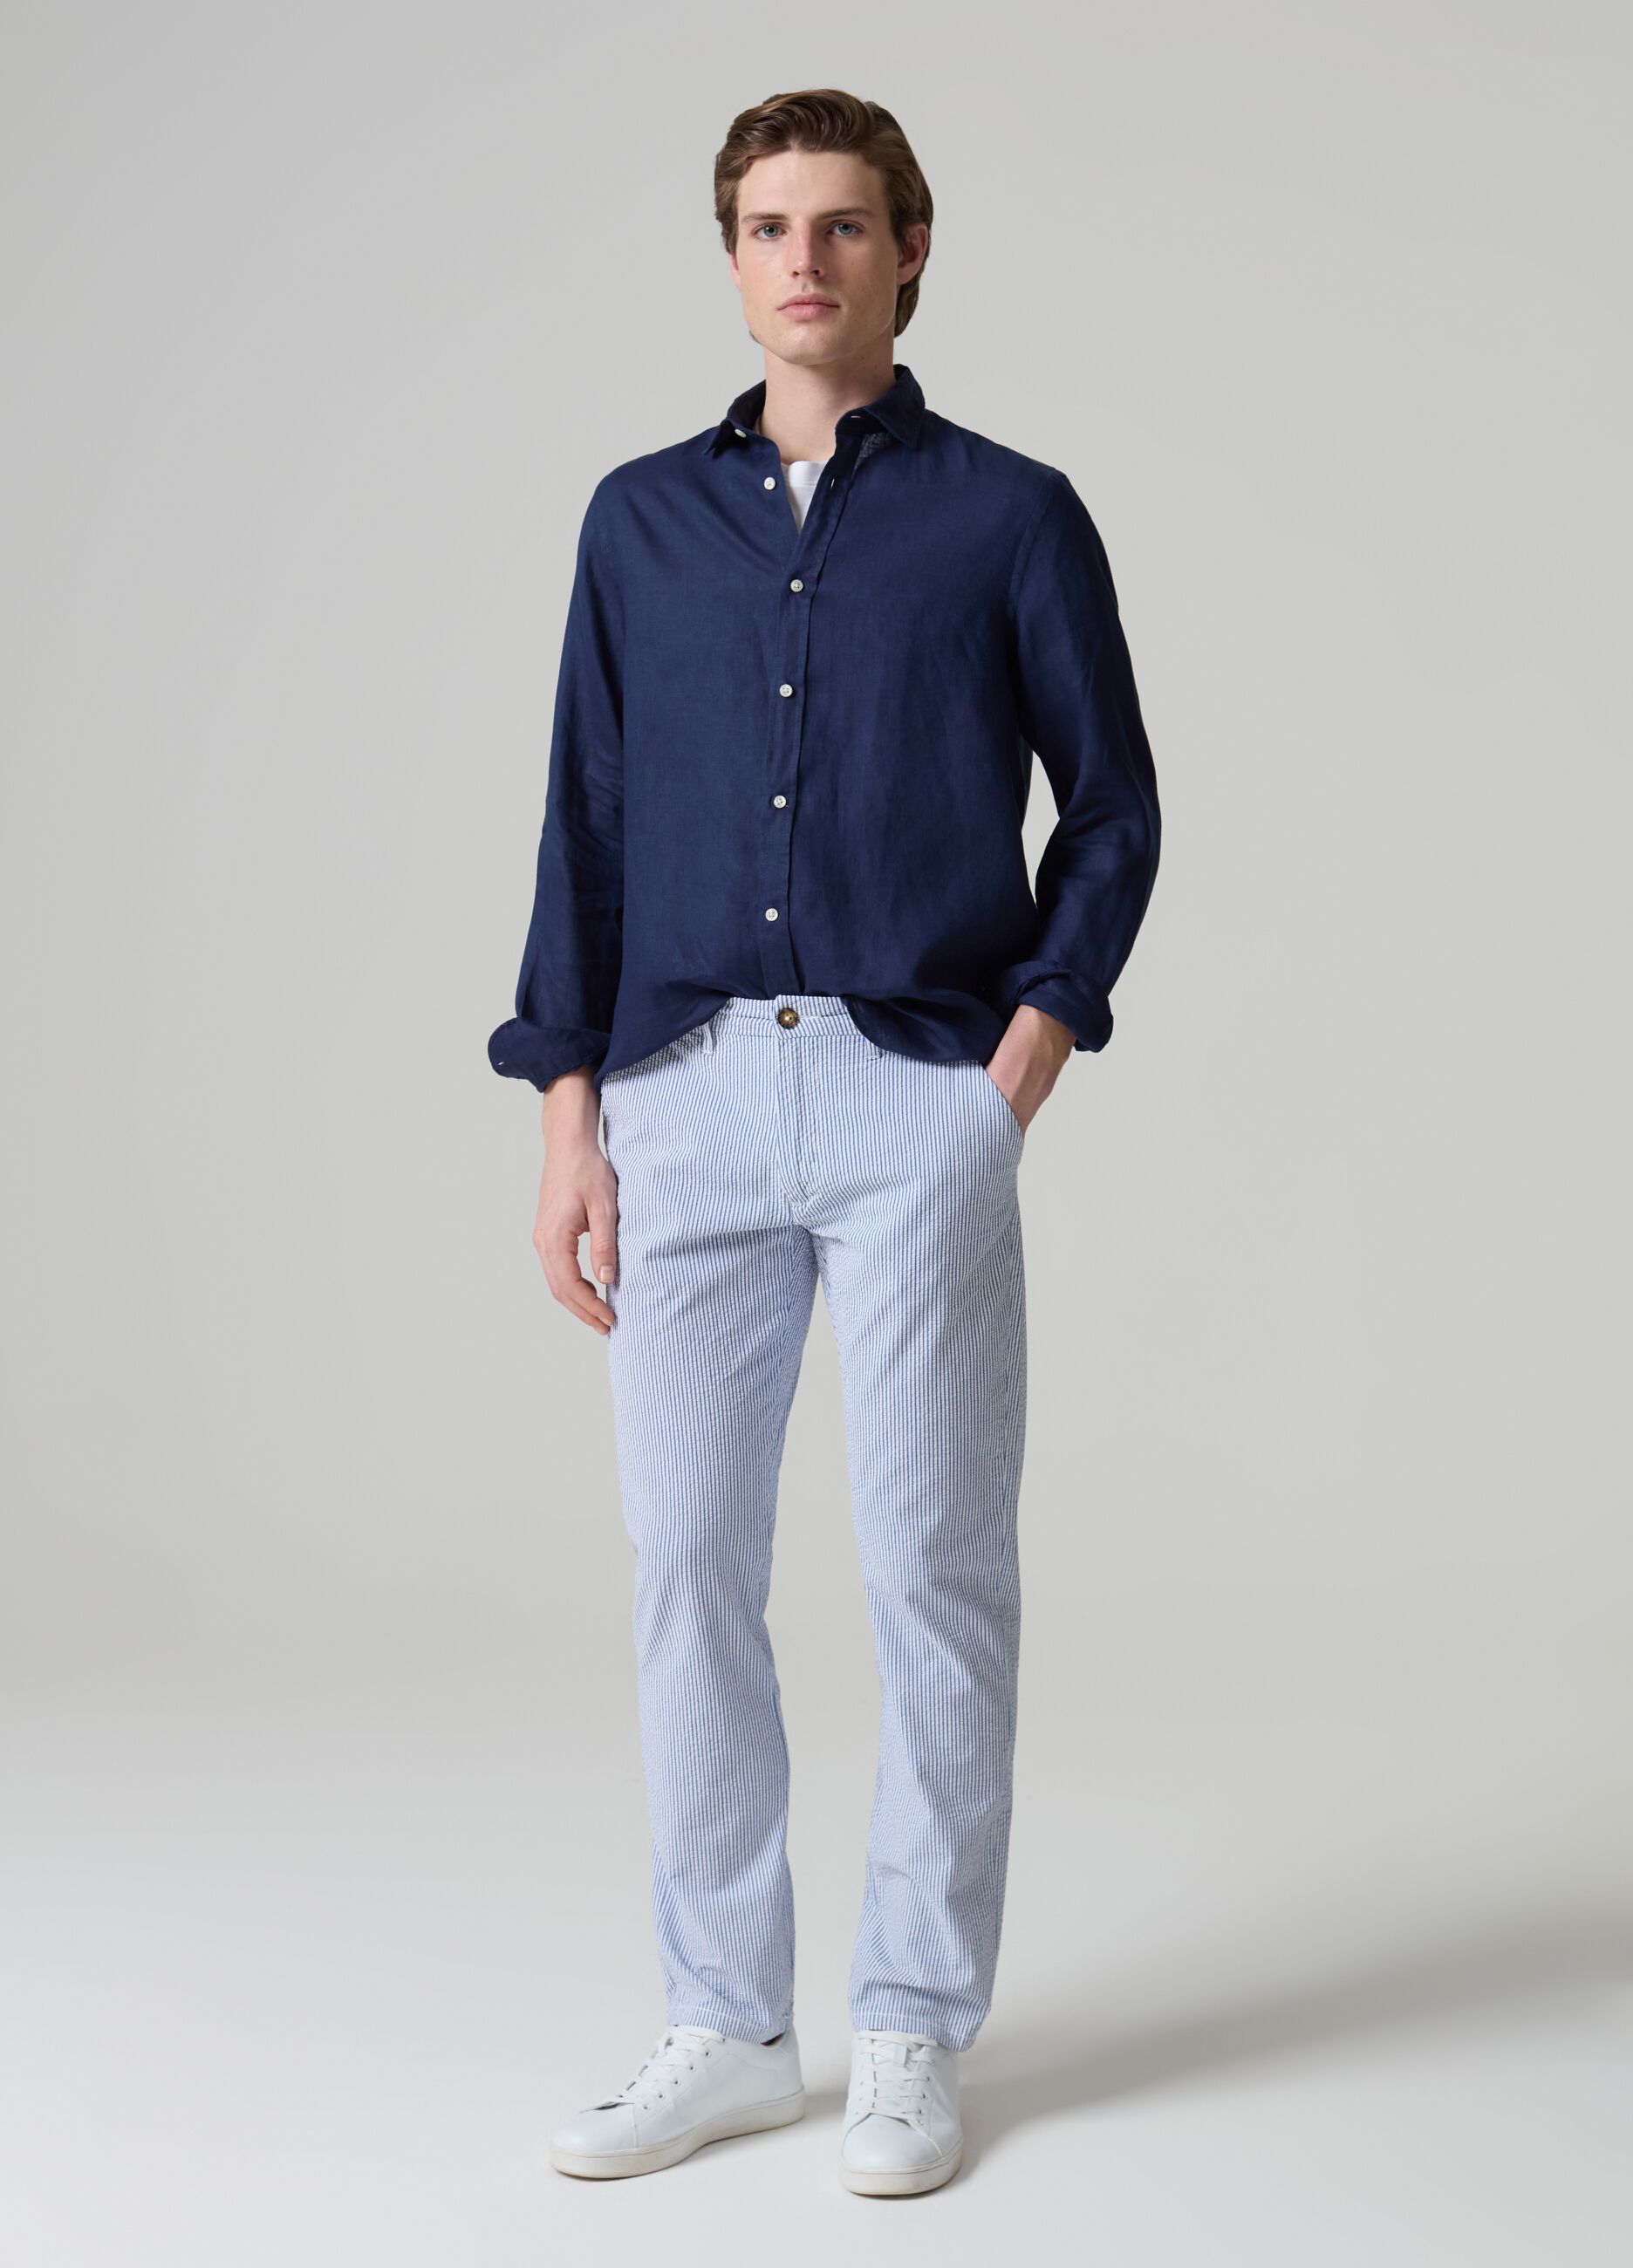 Chino trousers in seersucker with thin stripes